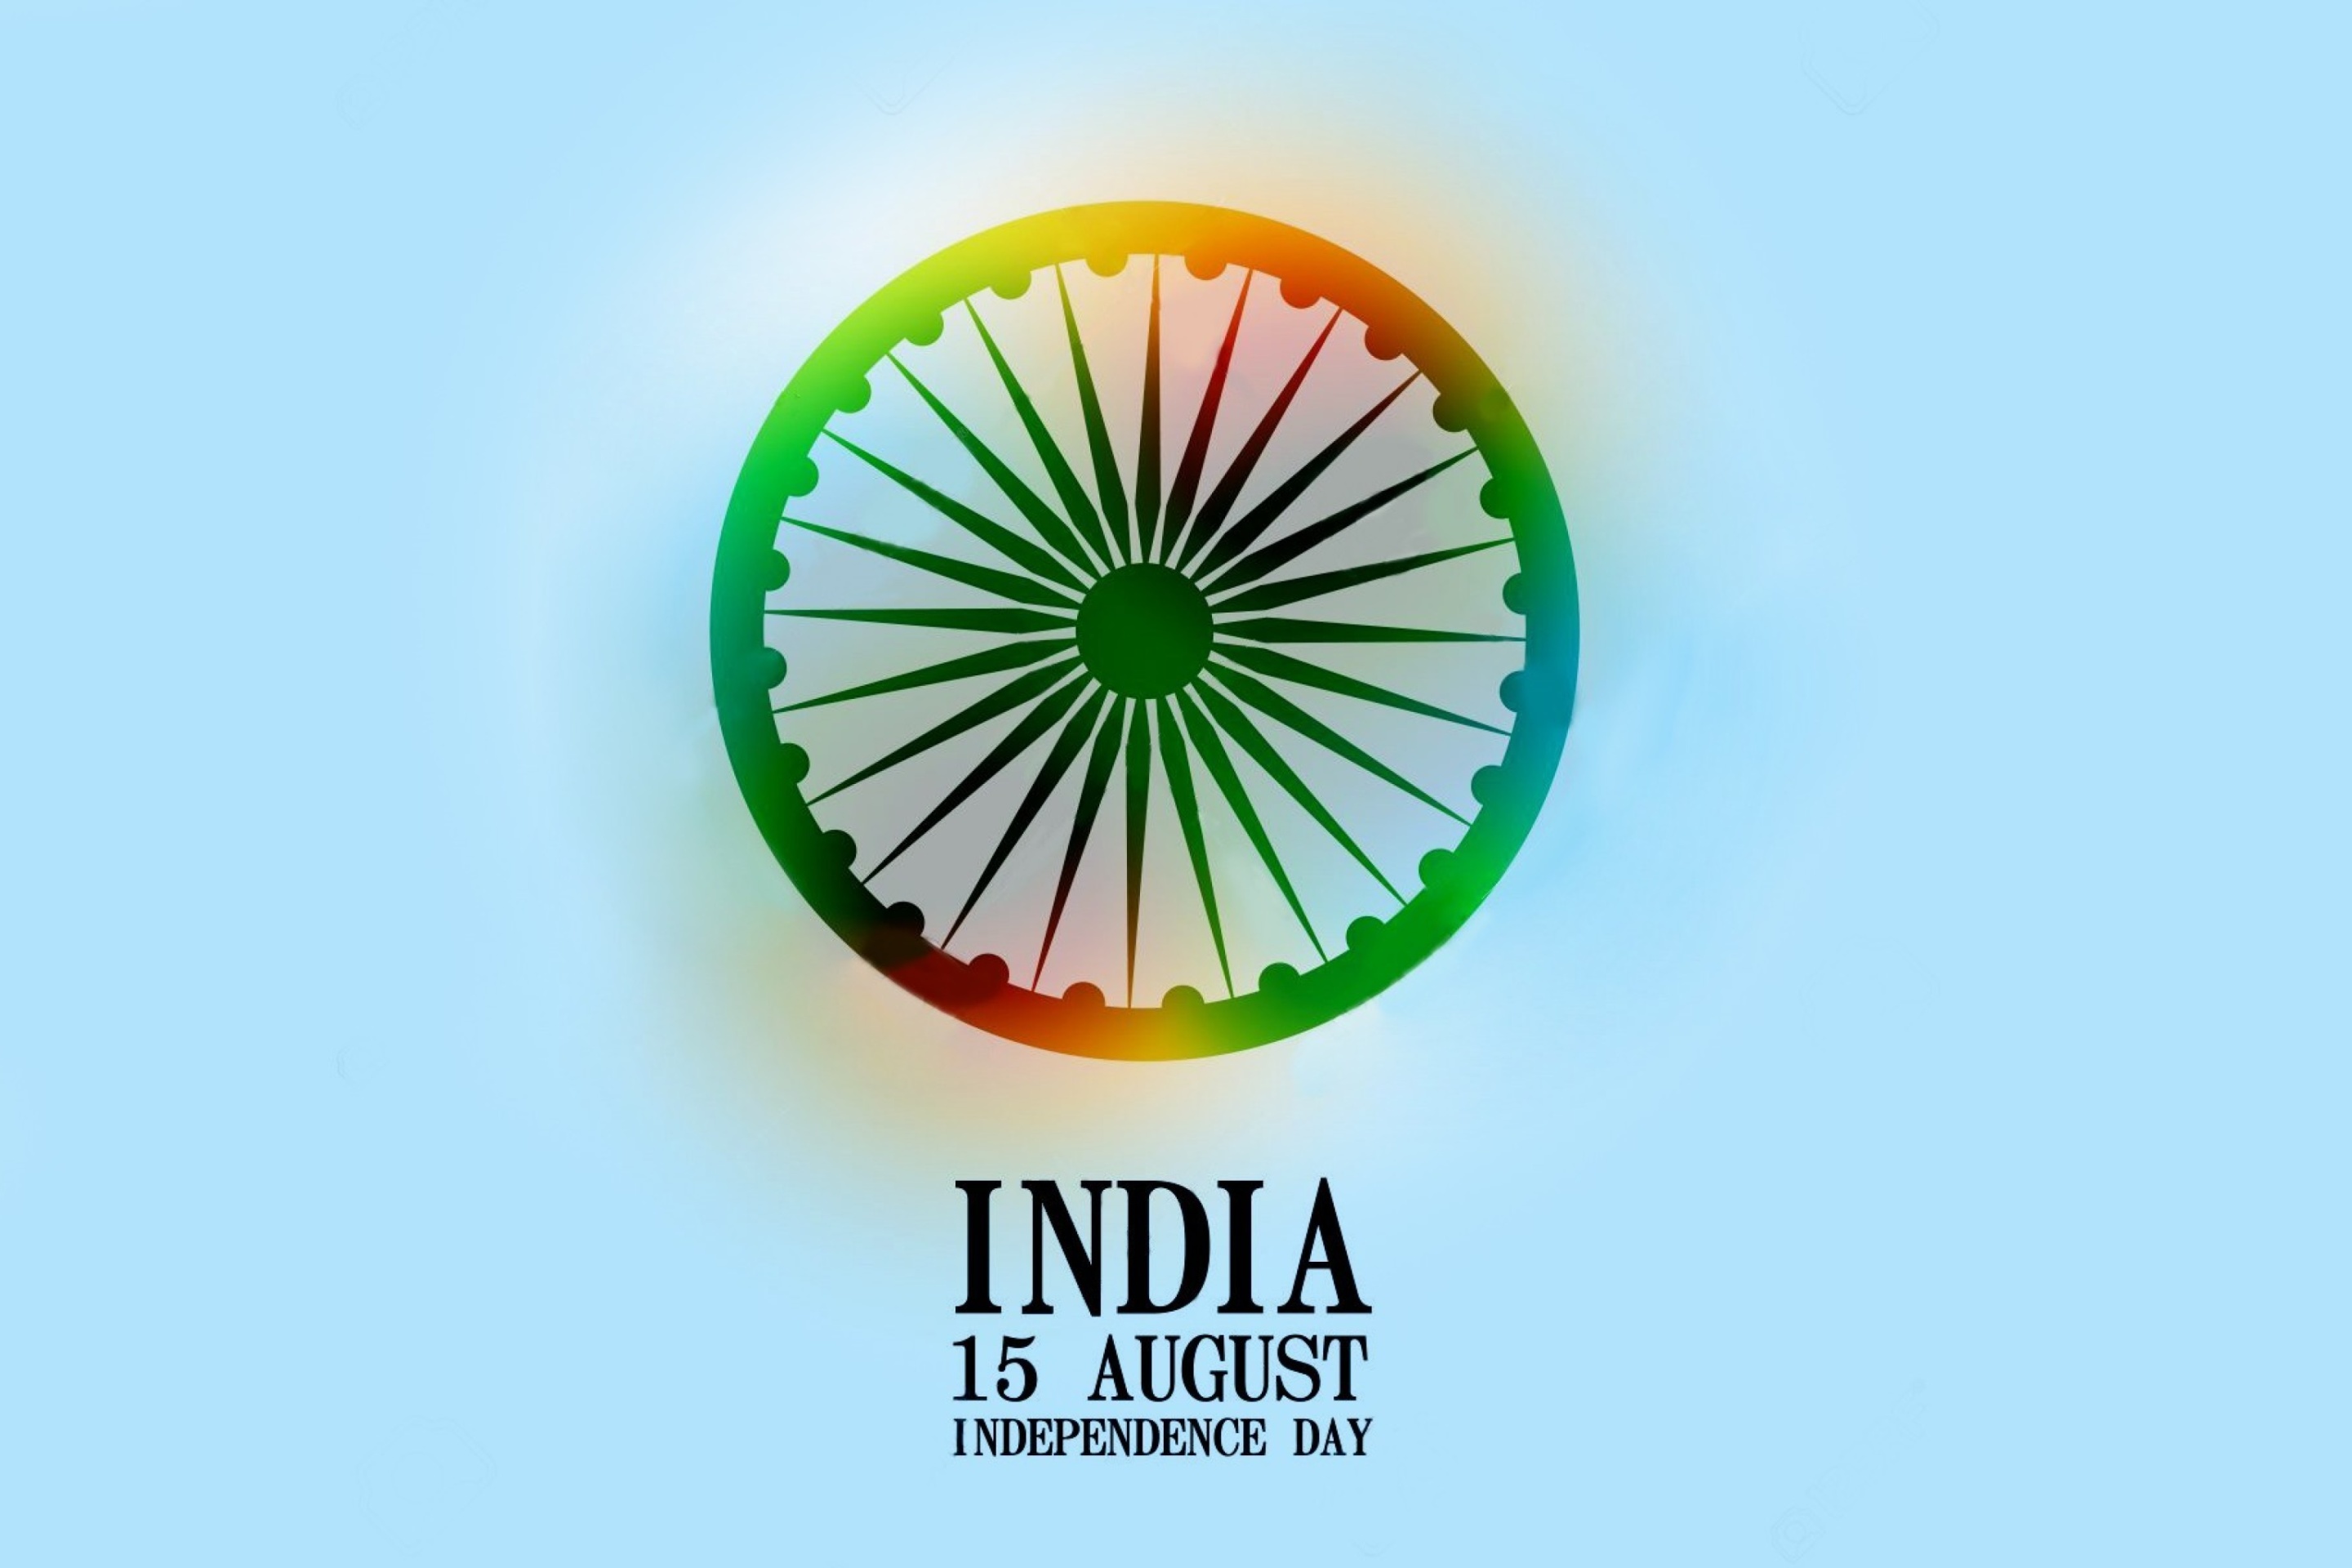 India Independence Day 15 August wallpaper 2880x1920